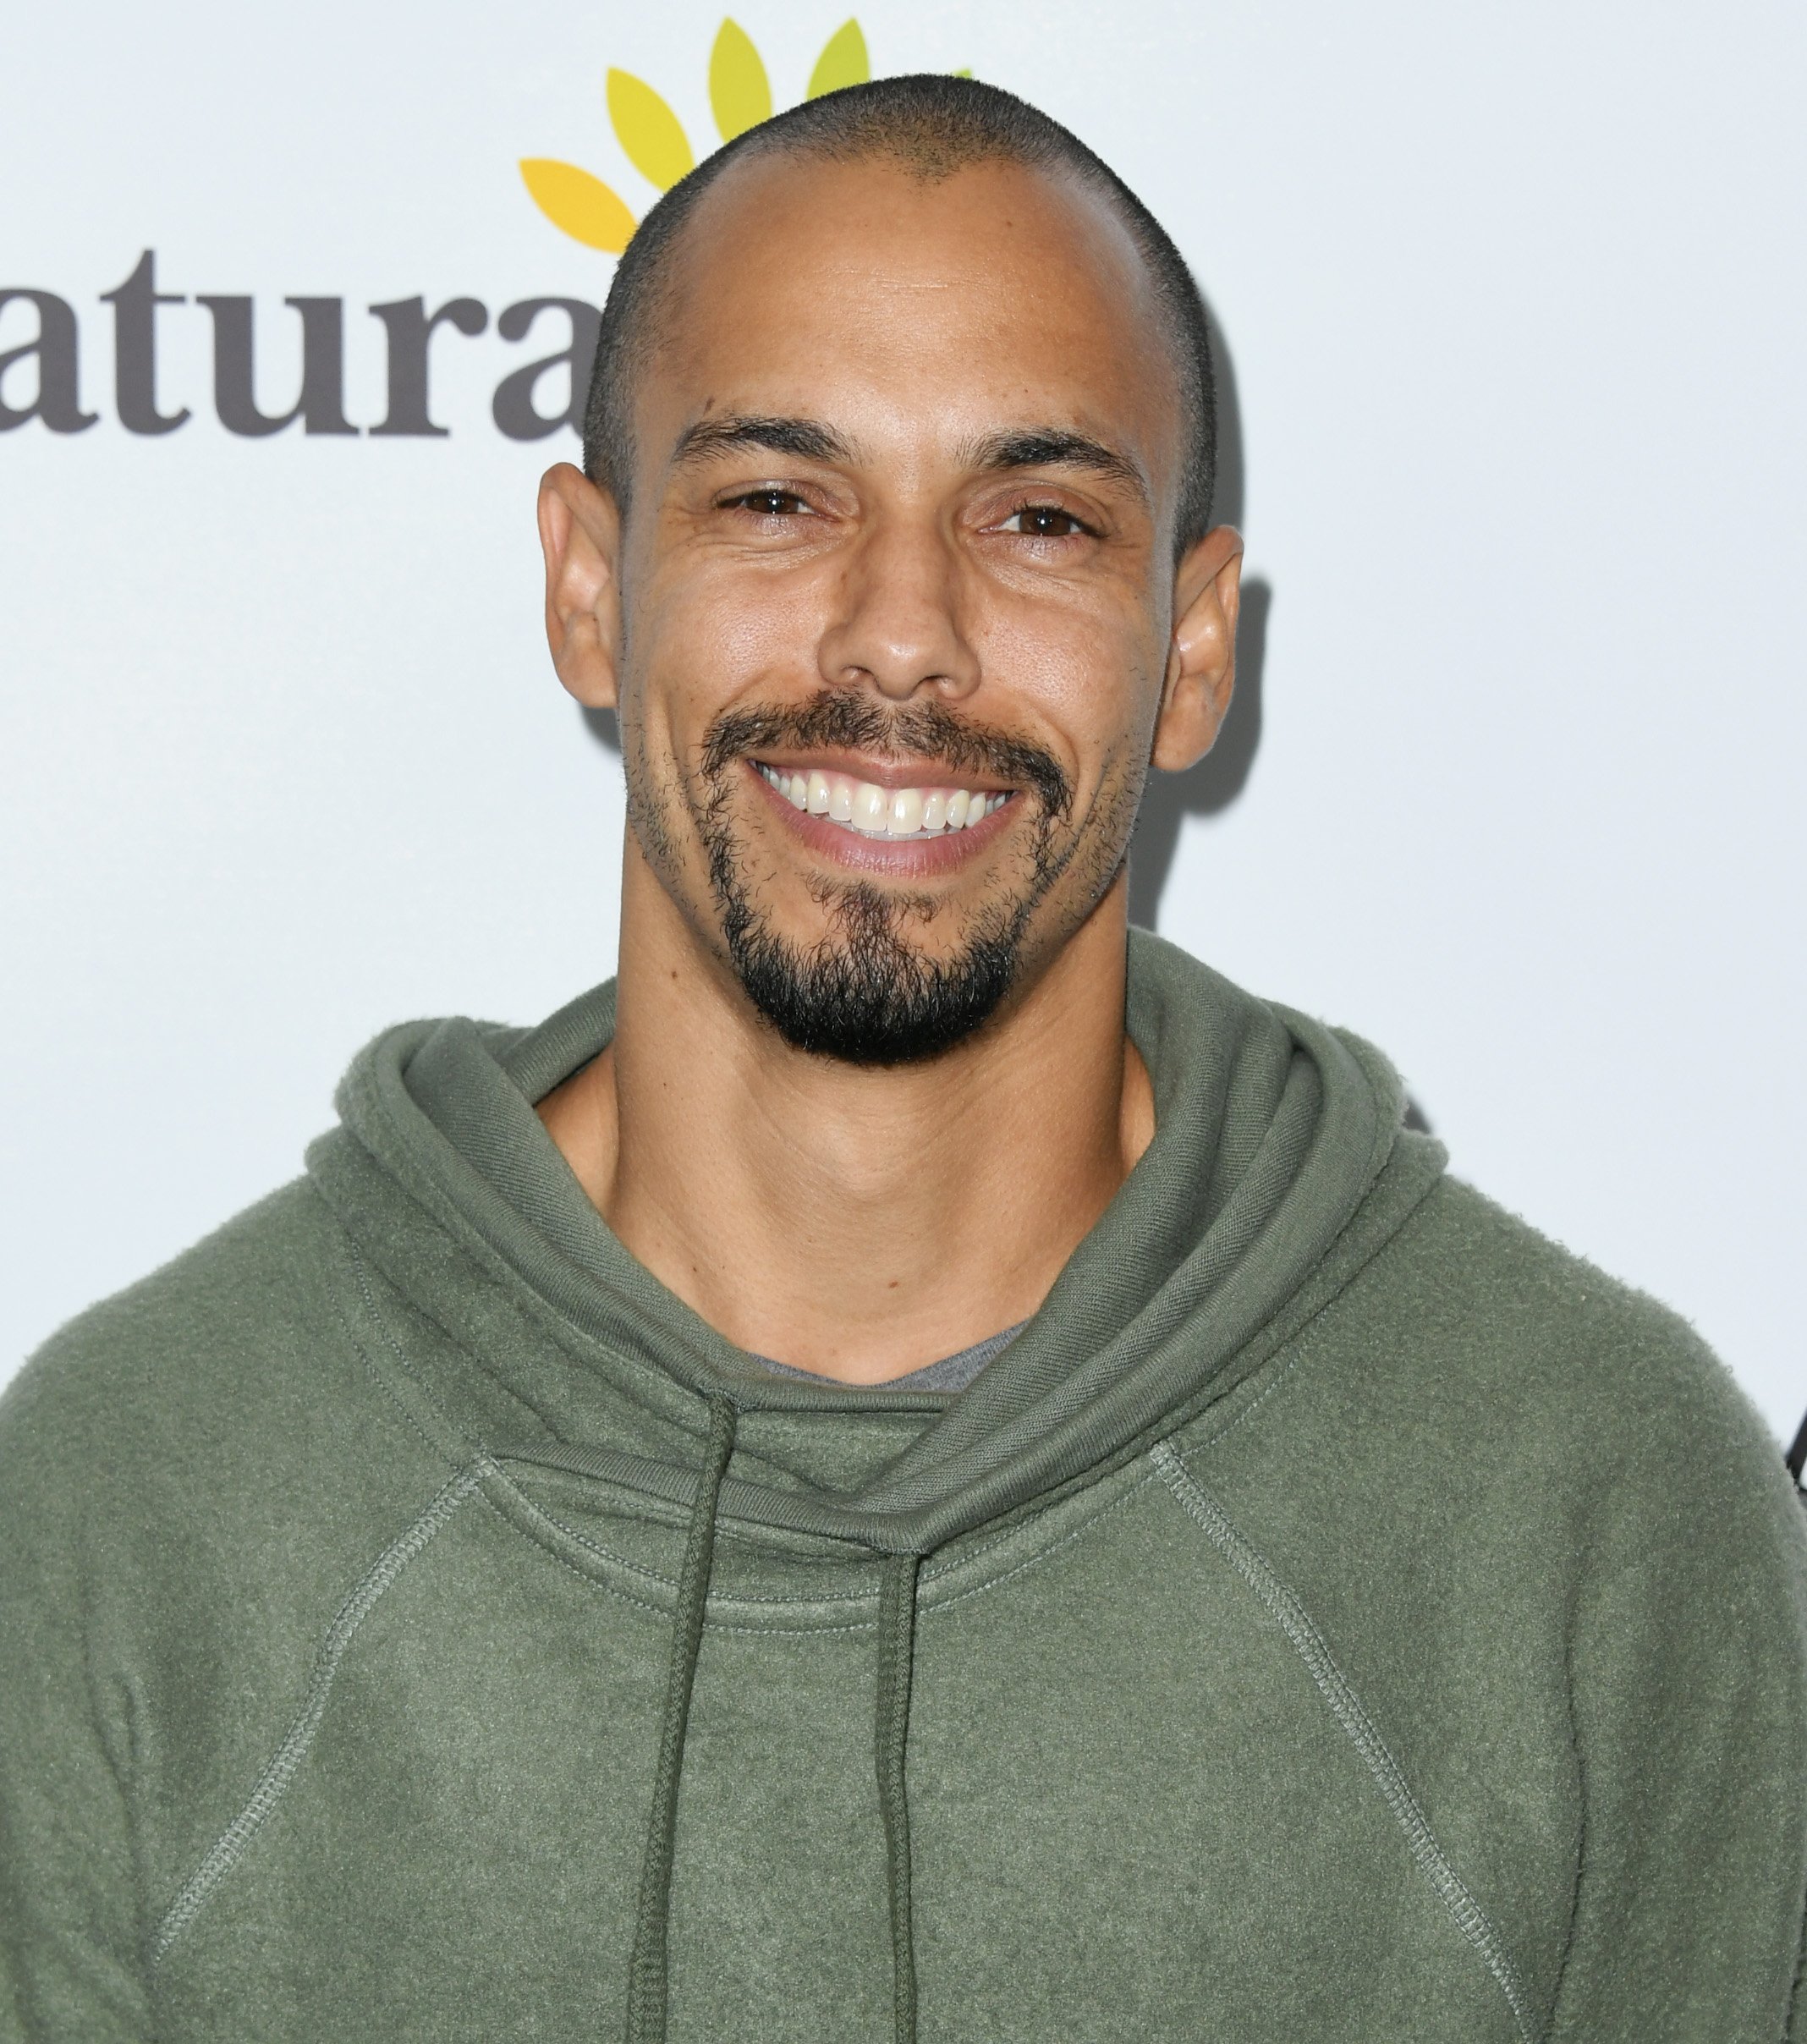 Bryton James photographed at an event